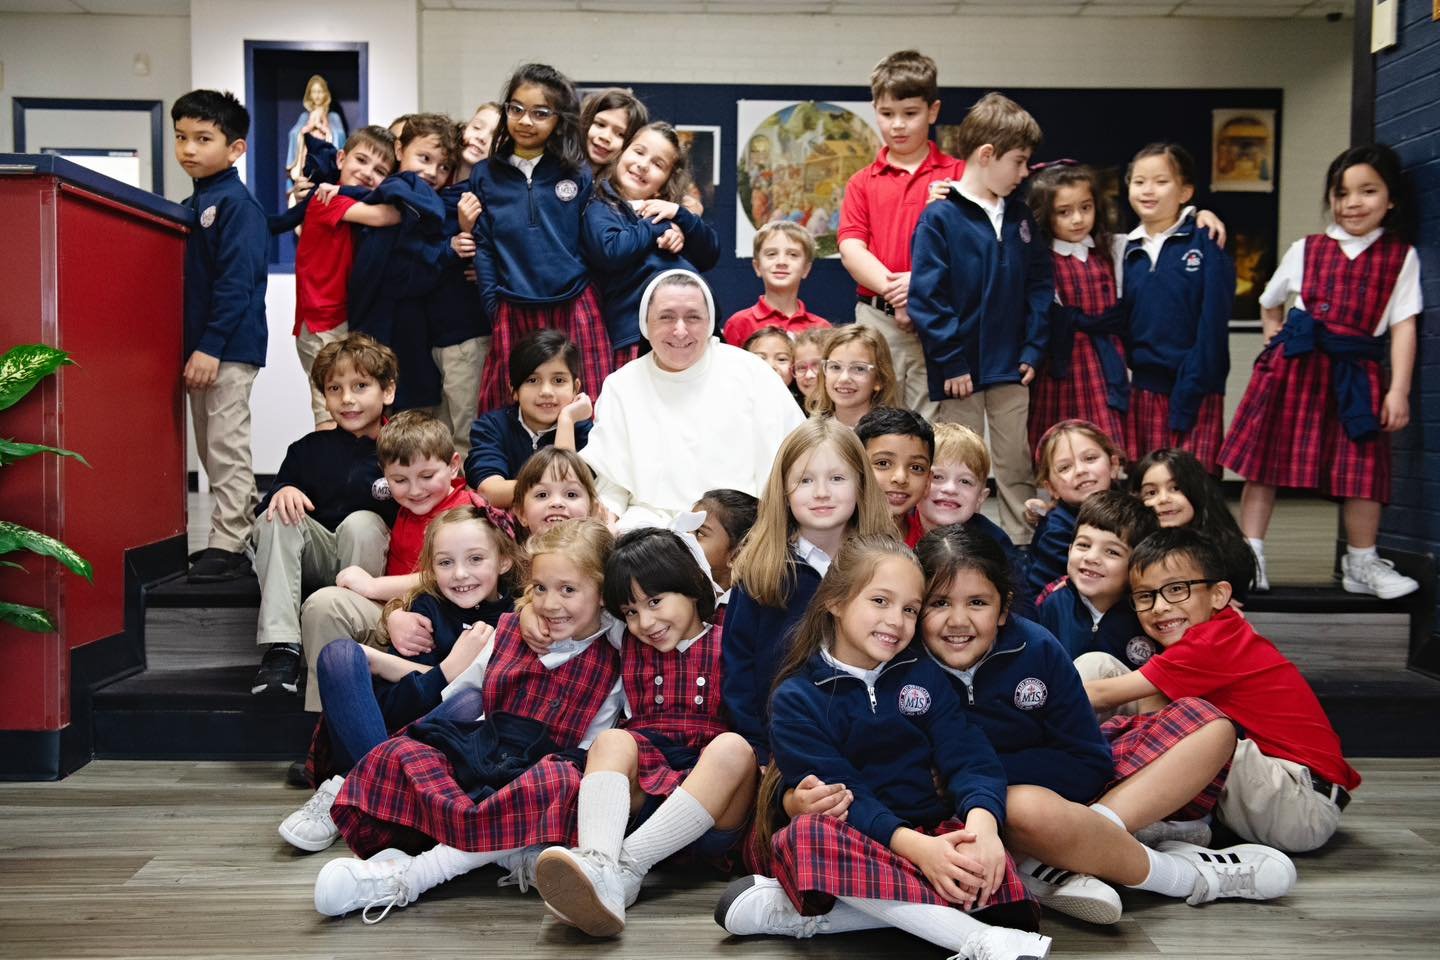 🎉 Today, we're celebrating someone VERY special: Sister Mary Anne, our incredible school principal! On Principal Appreciation Day, we honor her dedication, wisdom, and compassionate leadership. From guiding us with kindness to inspiring us with fait